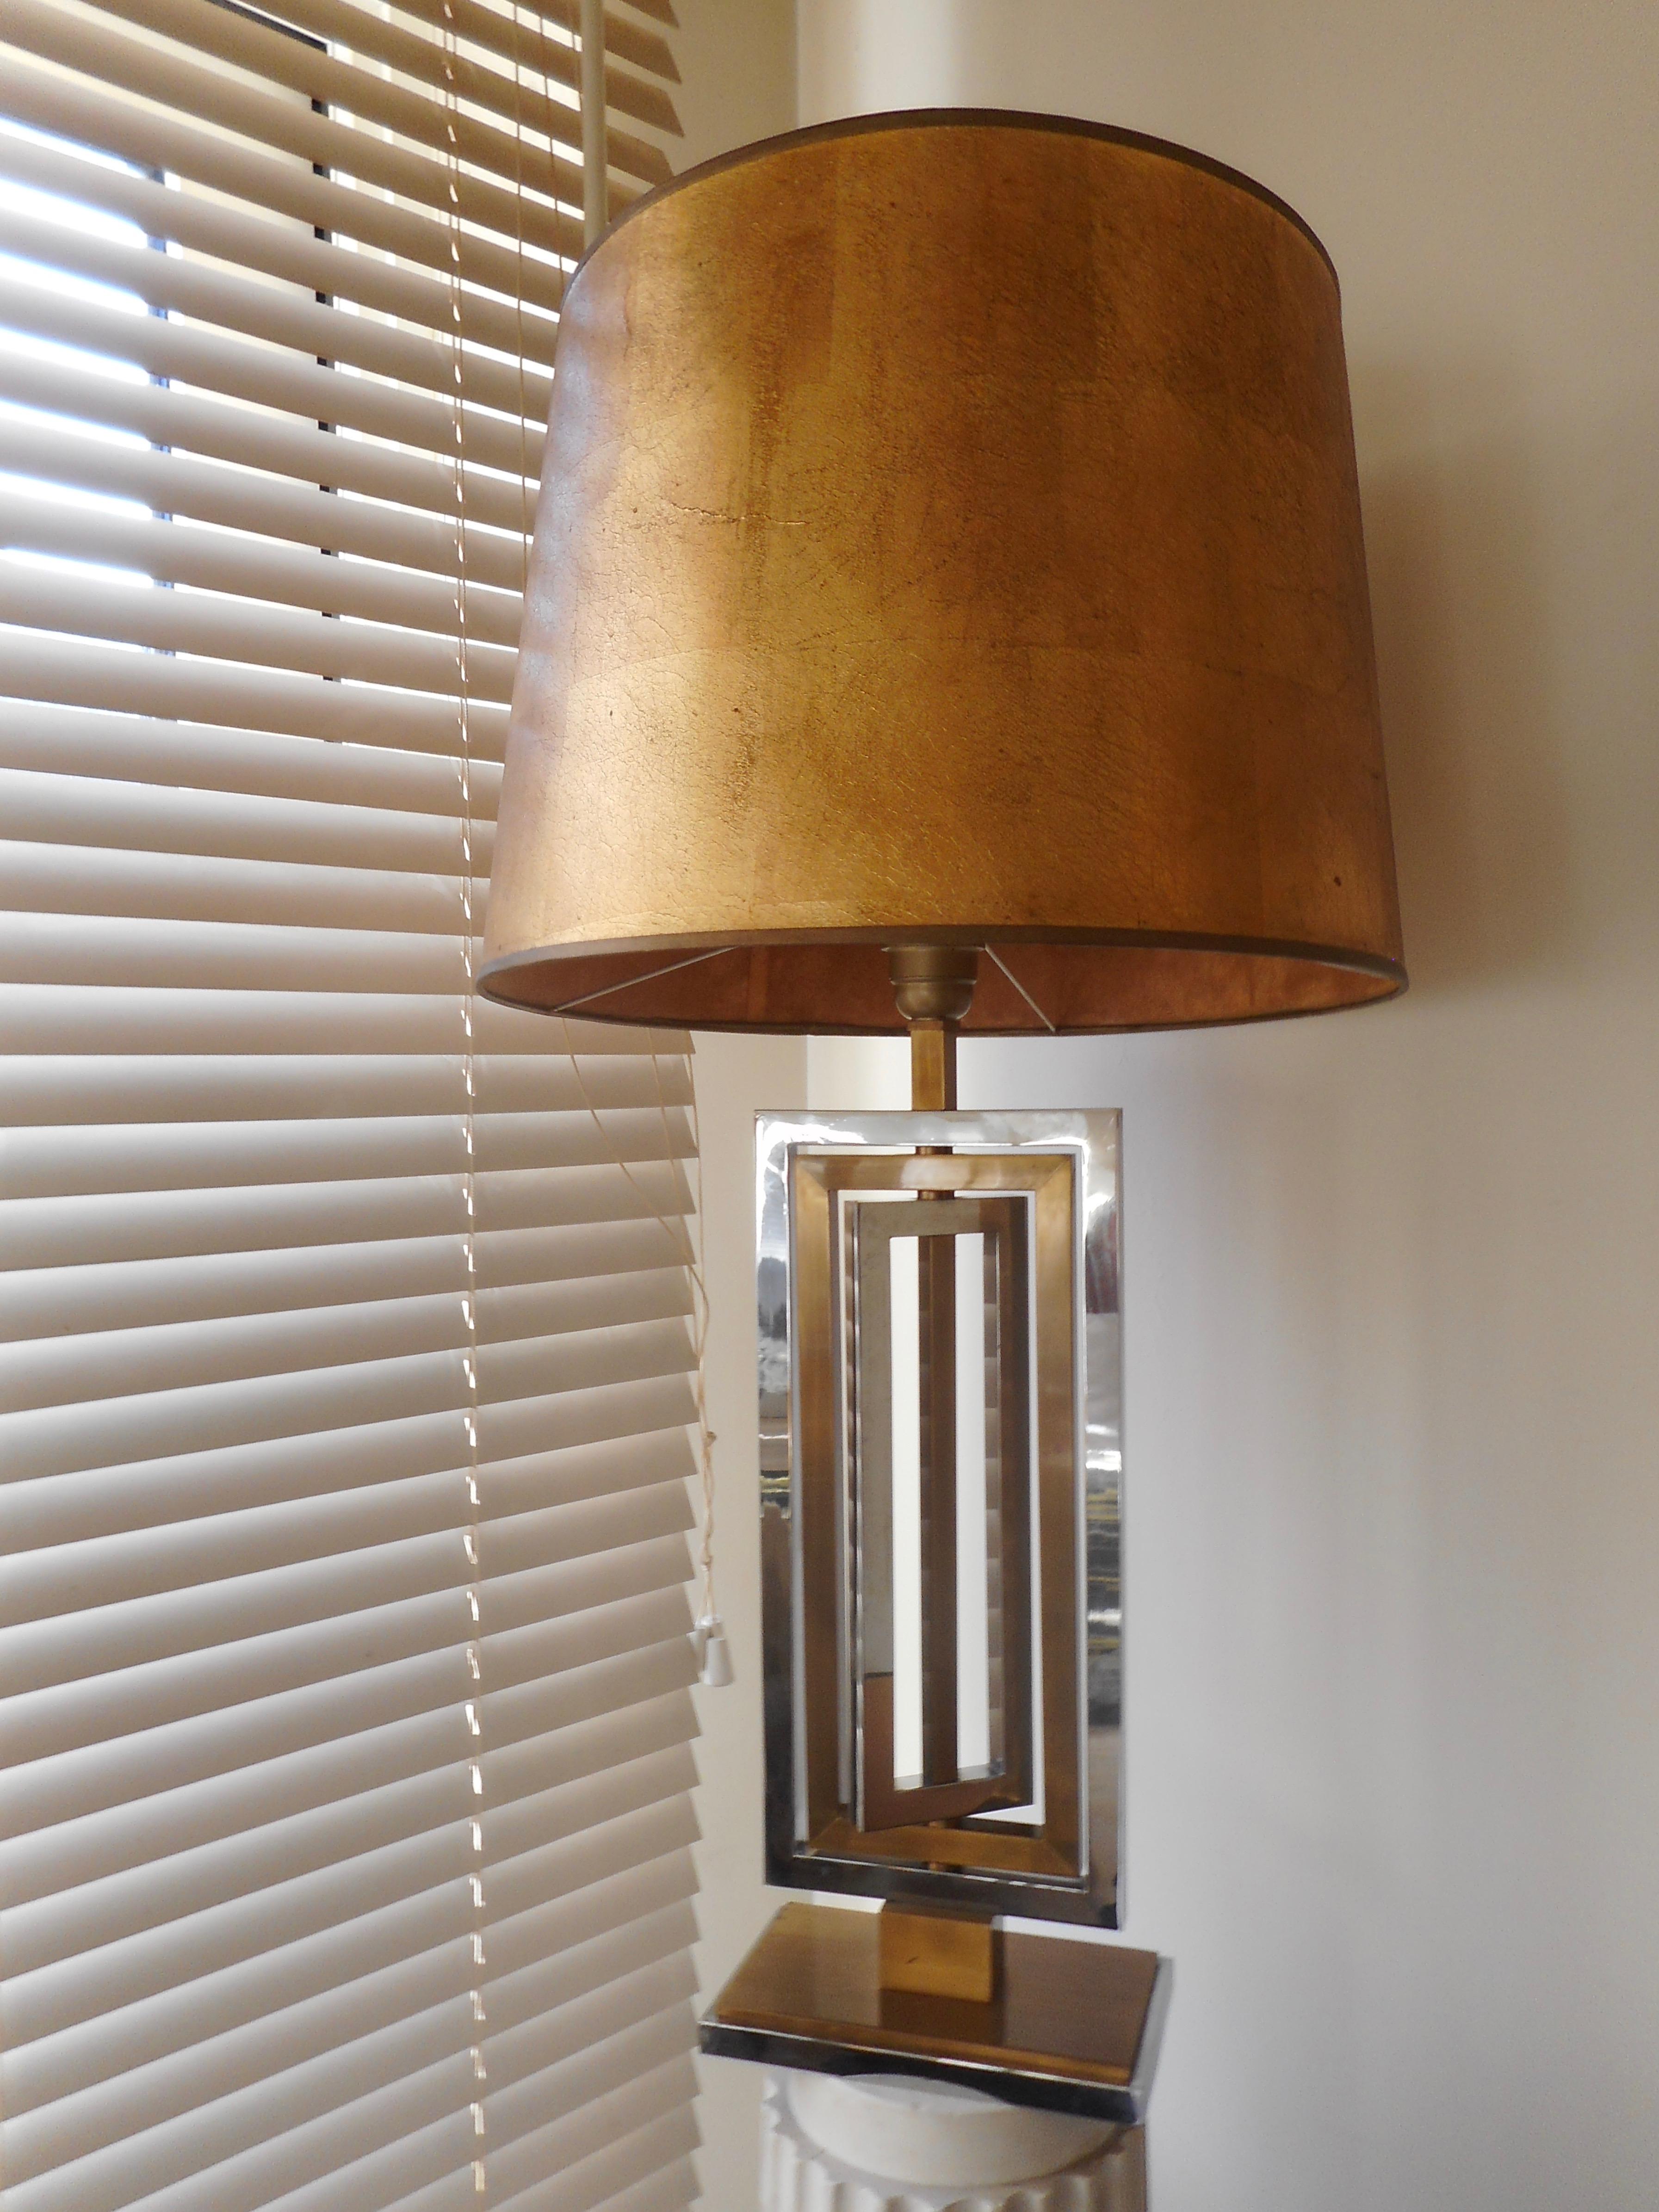 Two-tones brass and chrome geometric table lamp by Maison Jansen.
The adjustable rectangular metal rods are rotating.
By Maison Jansen, France 1970.